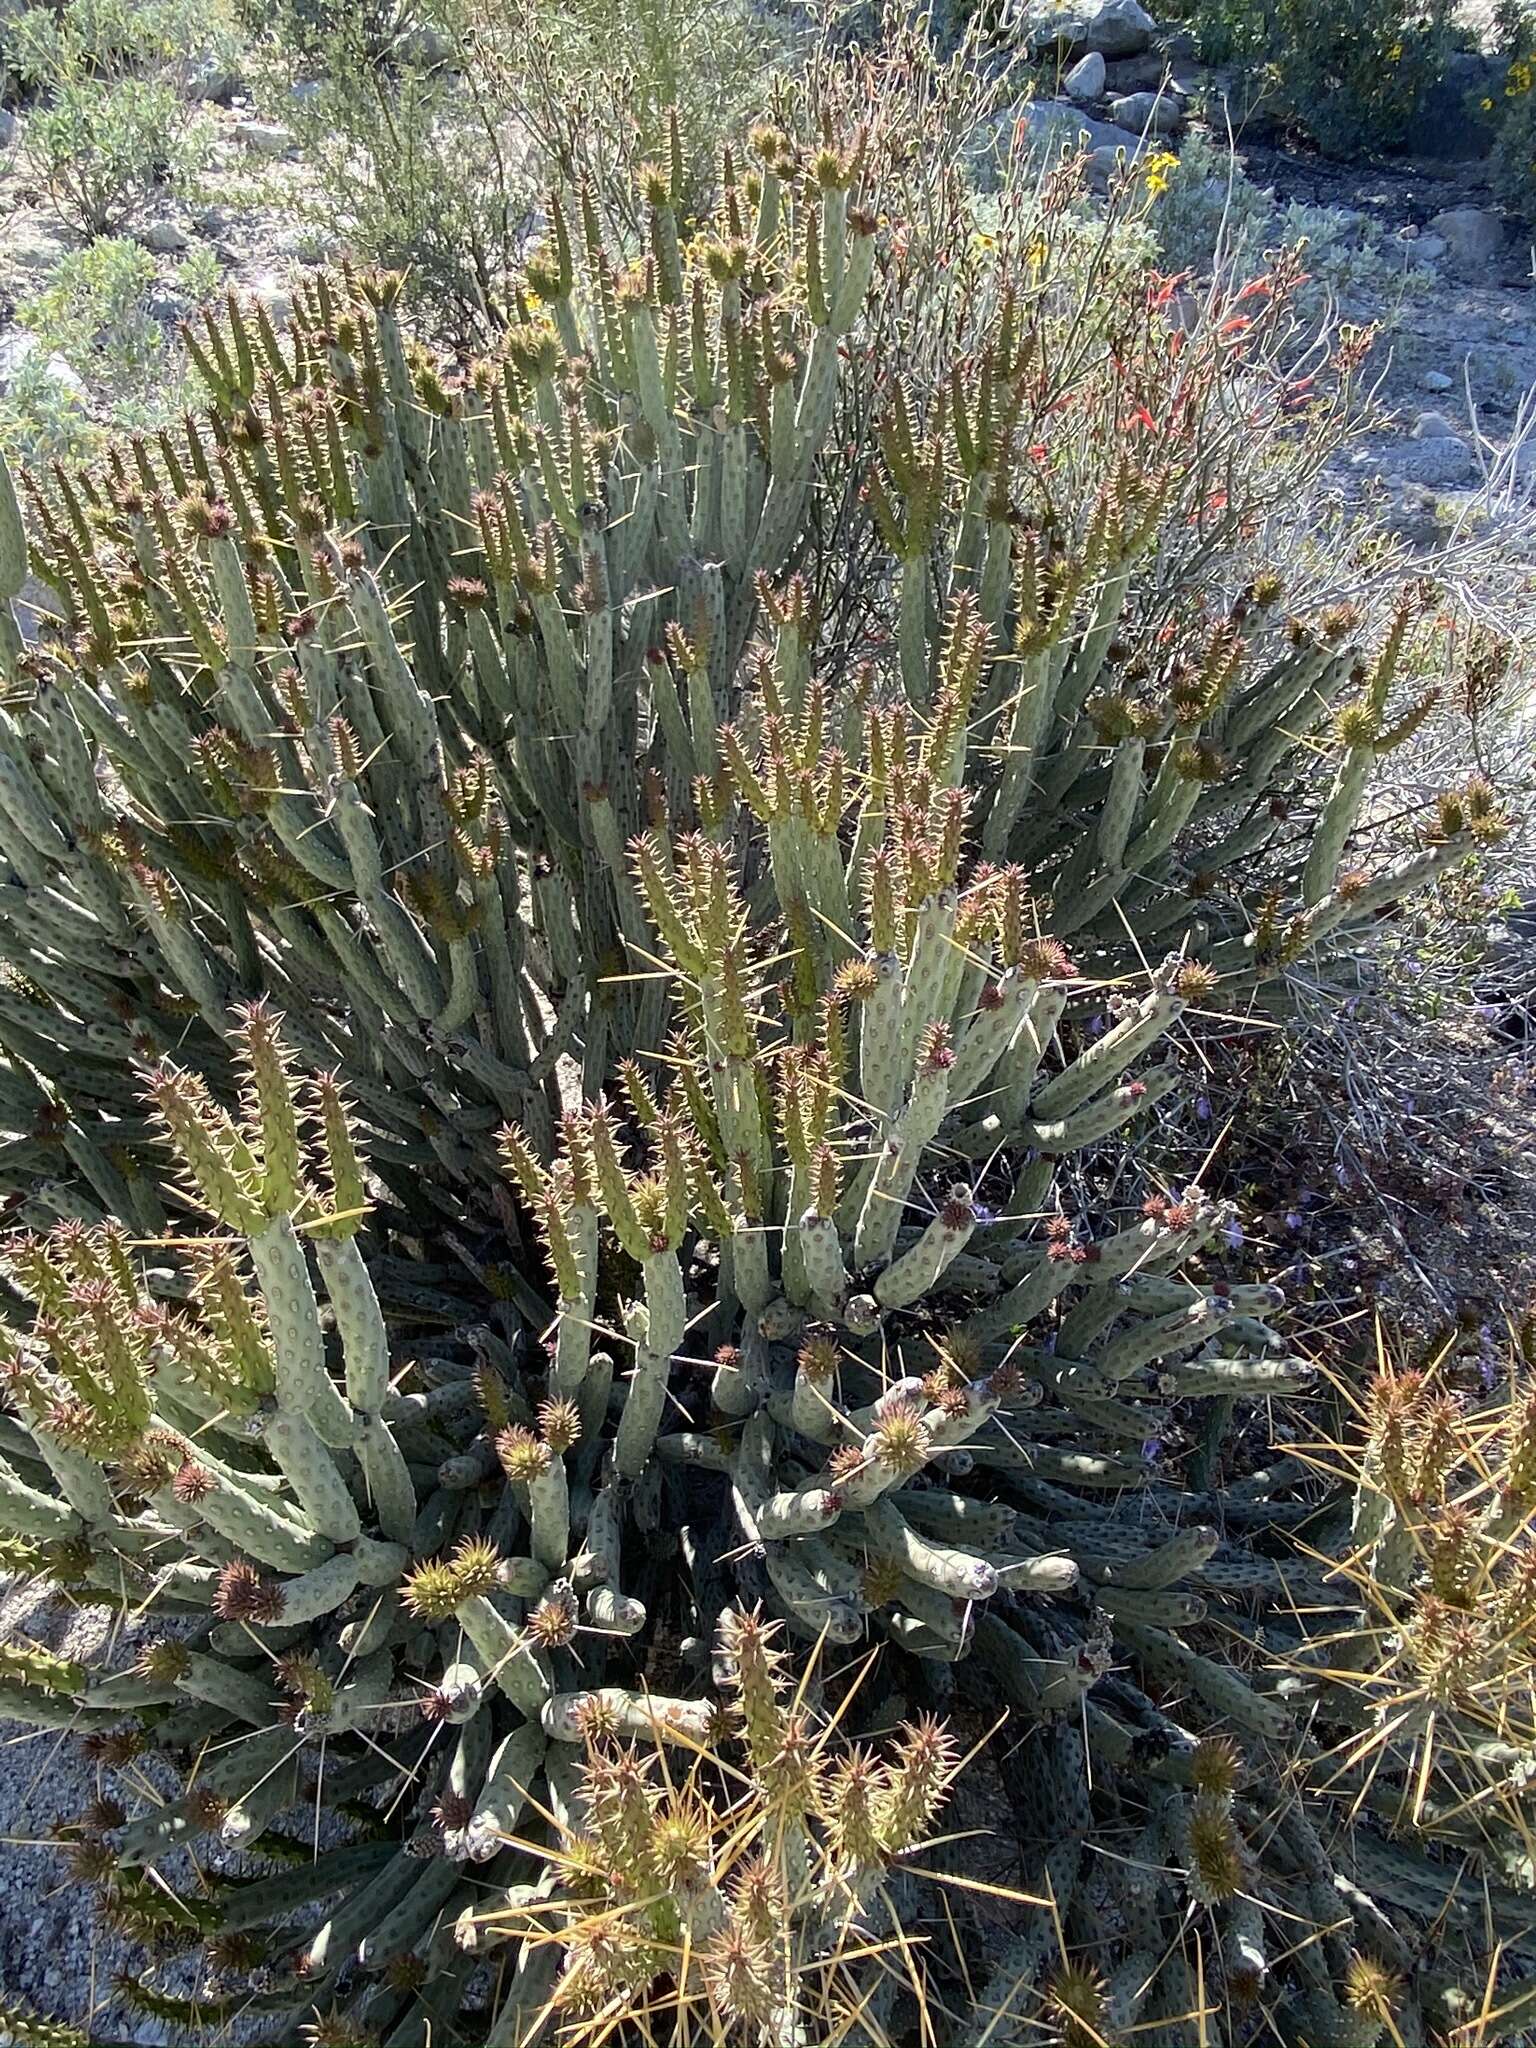 Image de Cylindropuntia tesajo (Engelm. ex J. M. Coult.) F. M. Knuth